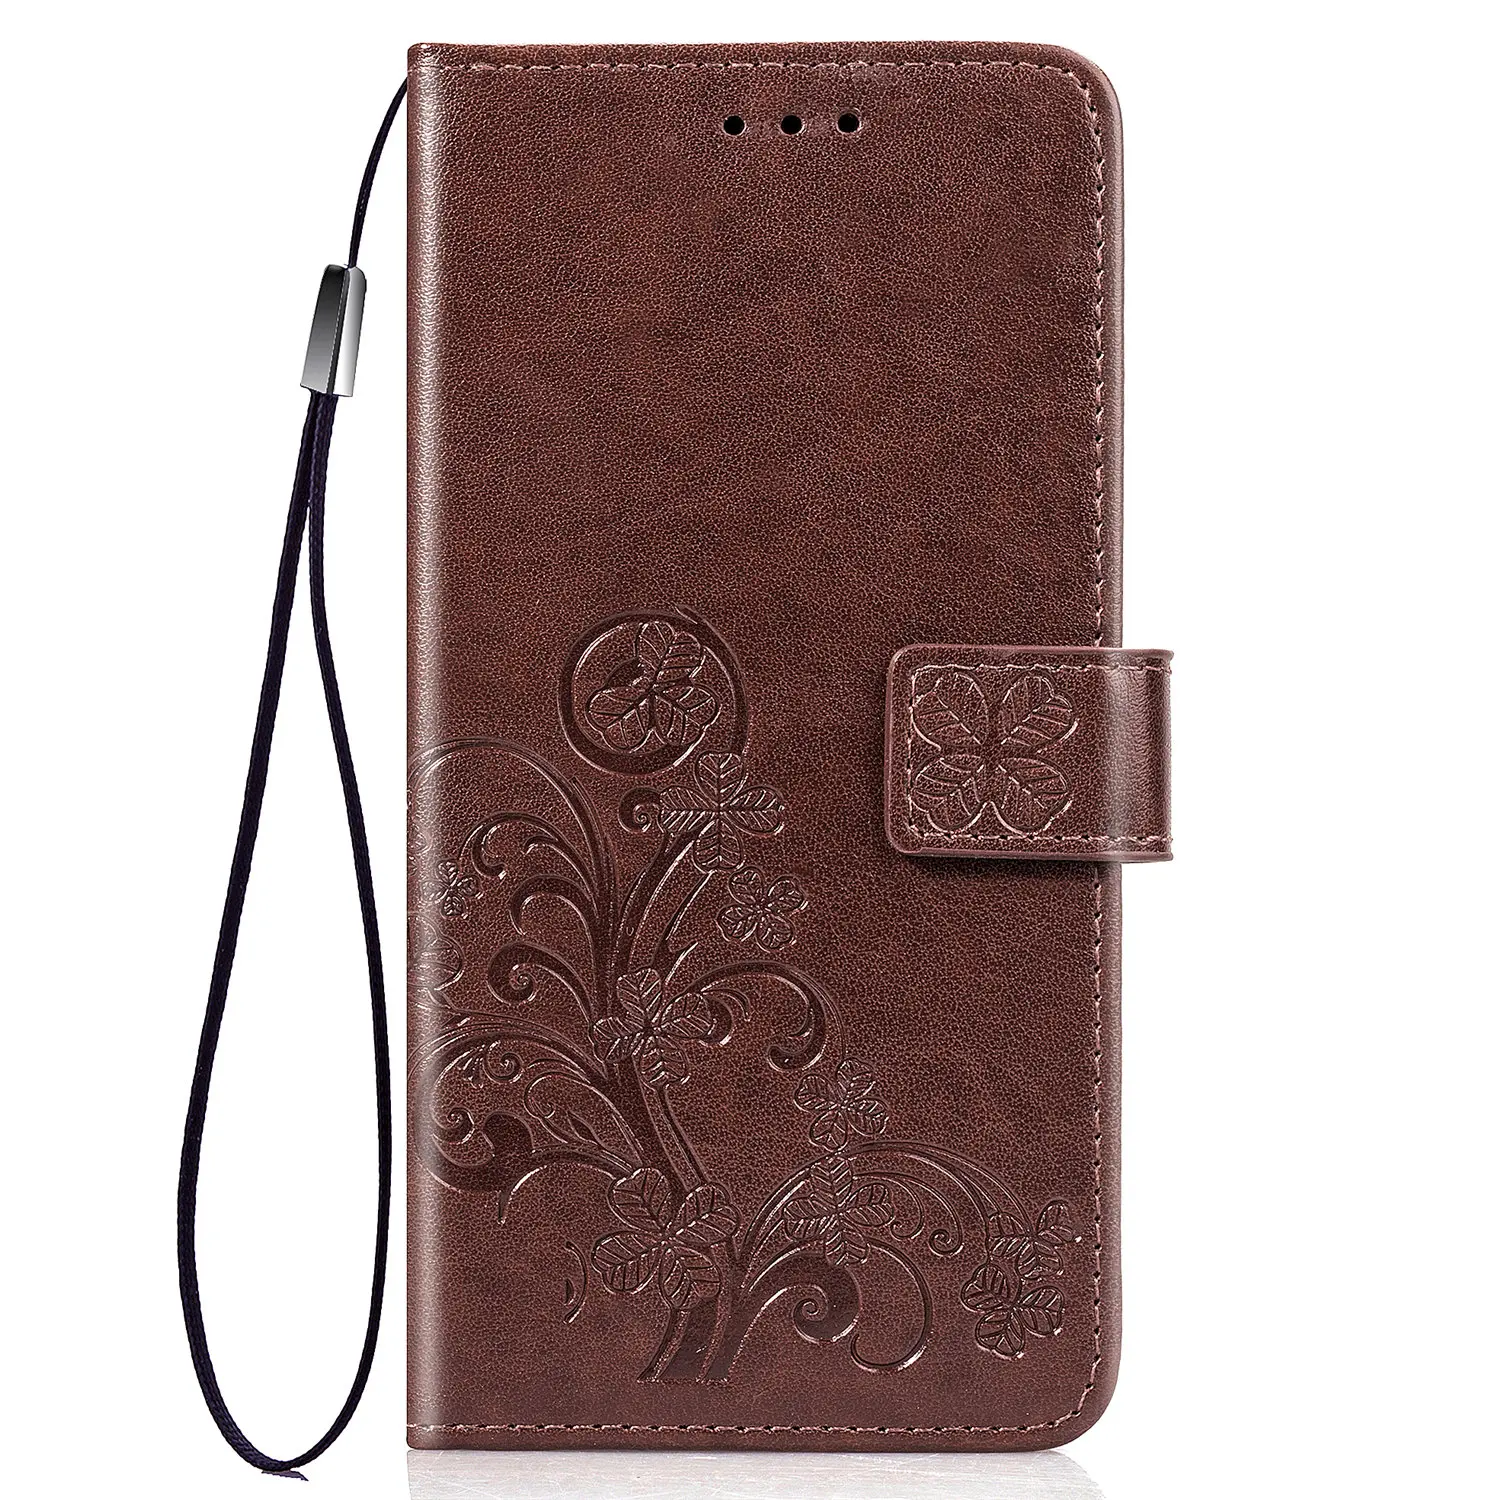 

Pu Leather Wallet Phone Case Tpu Soft Silicone Back Cover for LG G4 Note / G Stylo / G4 Stylus LS770 Business Case